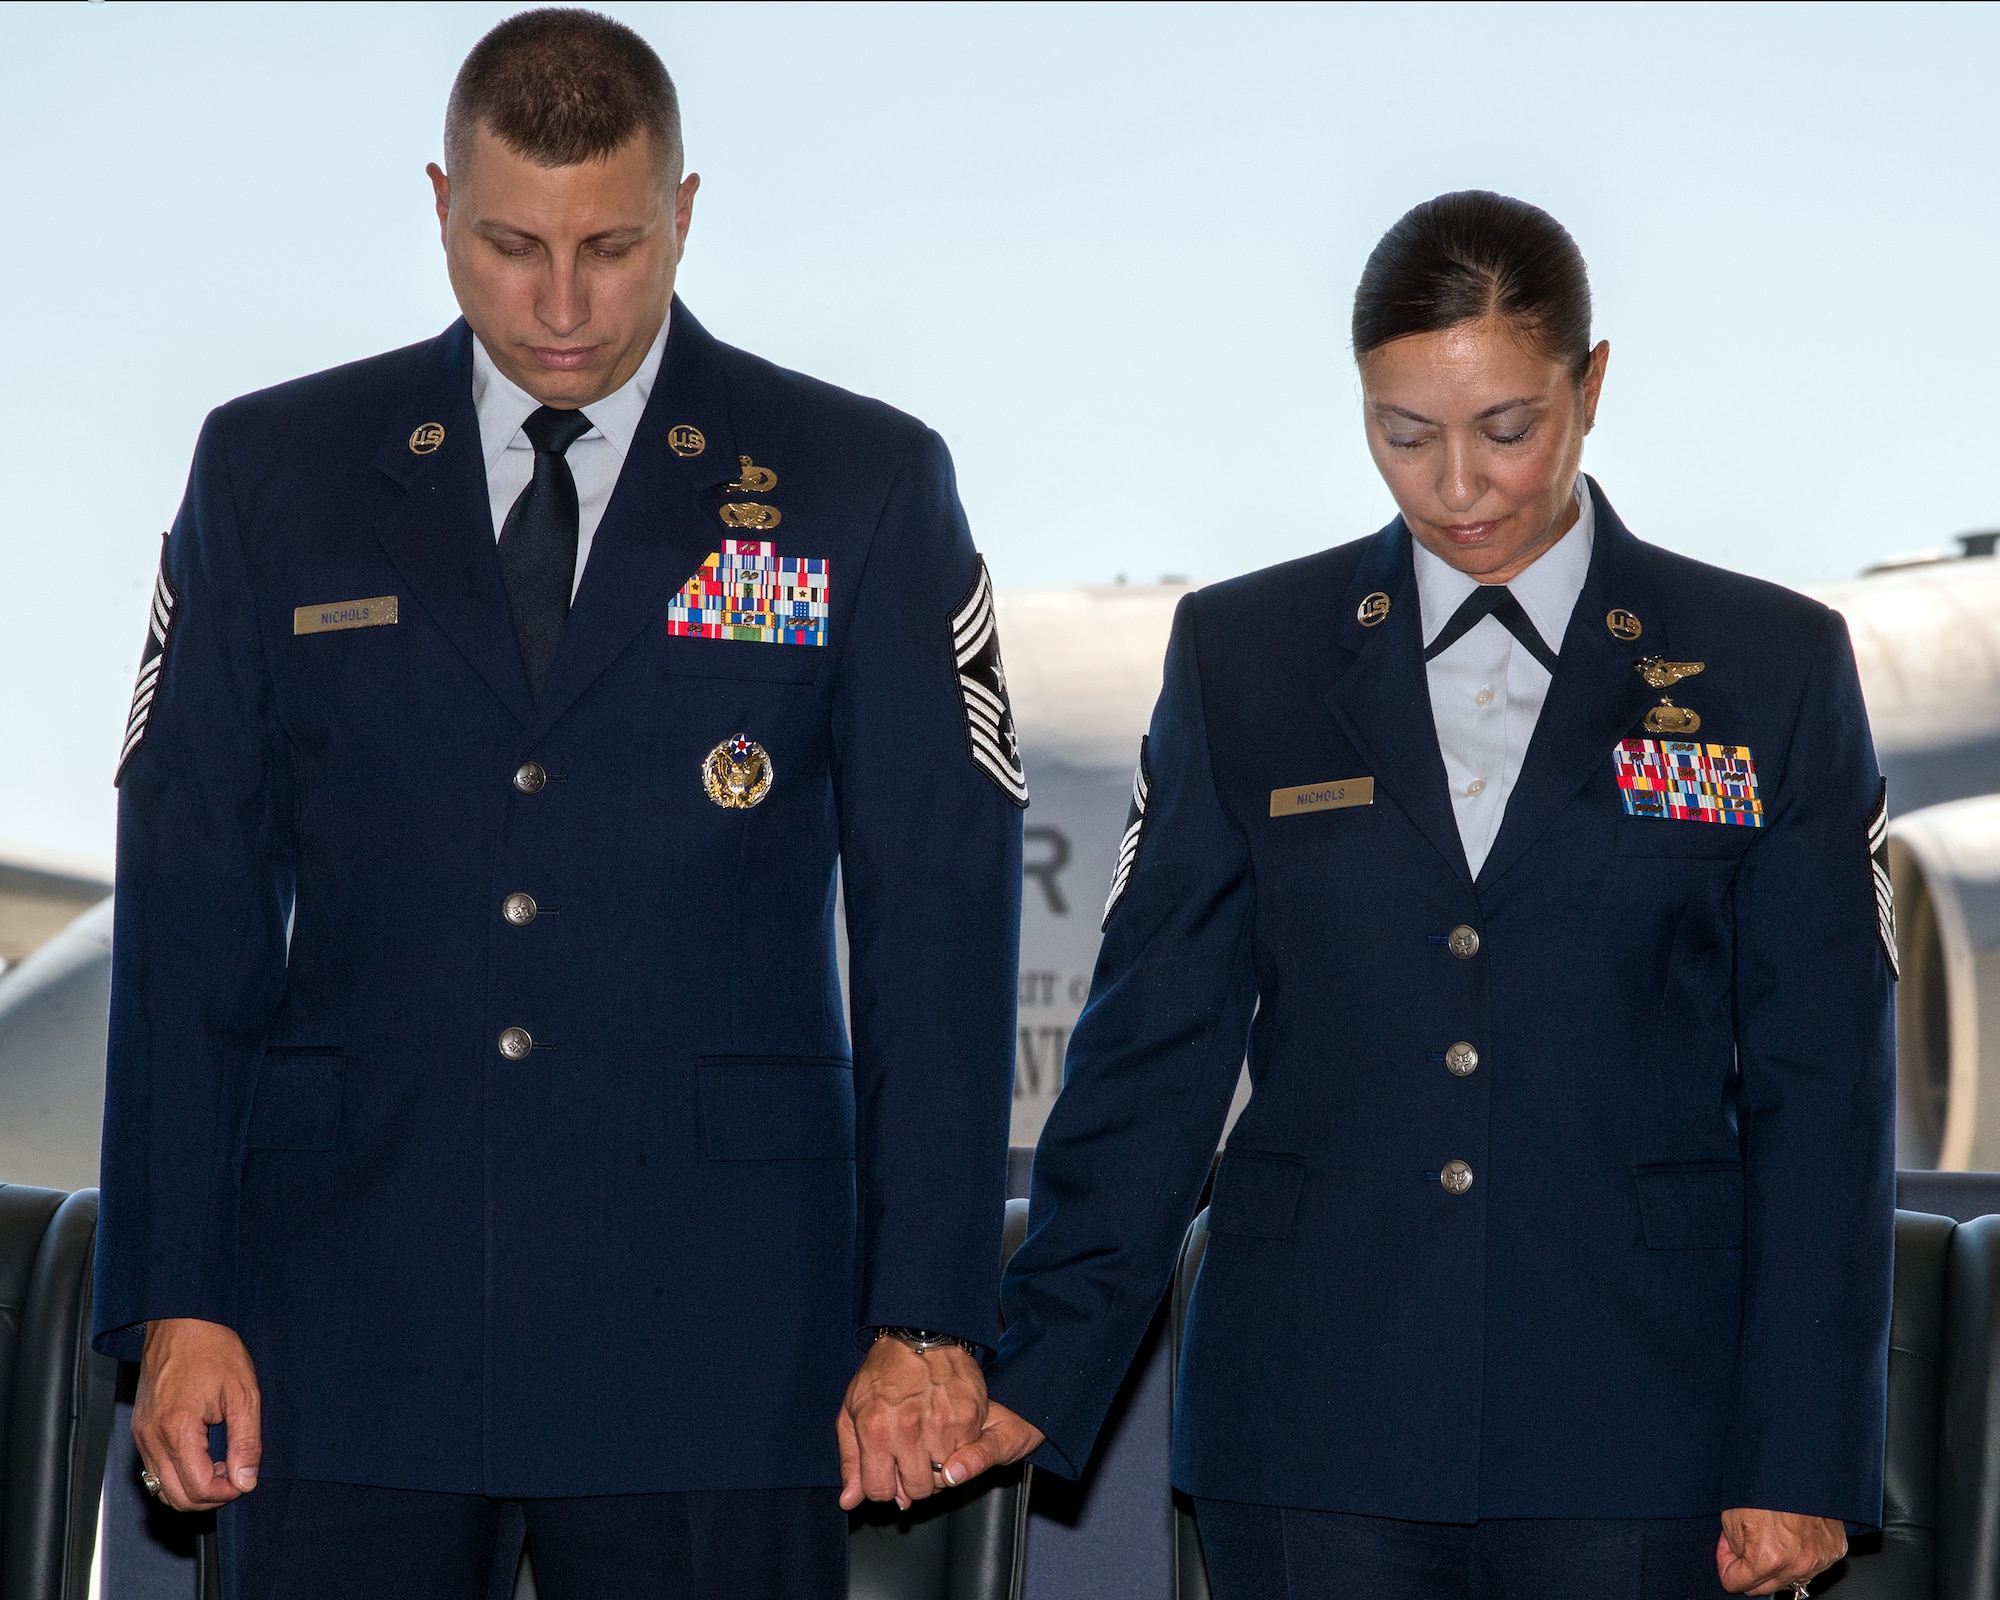 U.S. Air Force Chief Master Sgt. Steve Nichols, 60th Air Mobility Wing command chief and his spouse Senior Master Sgt. Angell Nichols, 60th Operations Support Squadron retire together in a duel ceremony at Travis Air Force Base, Calif., September 7, 2018. (U.S. Air Force photo by Louis Briscese)